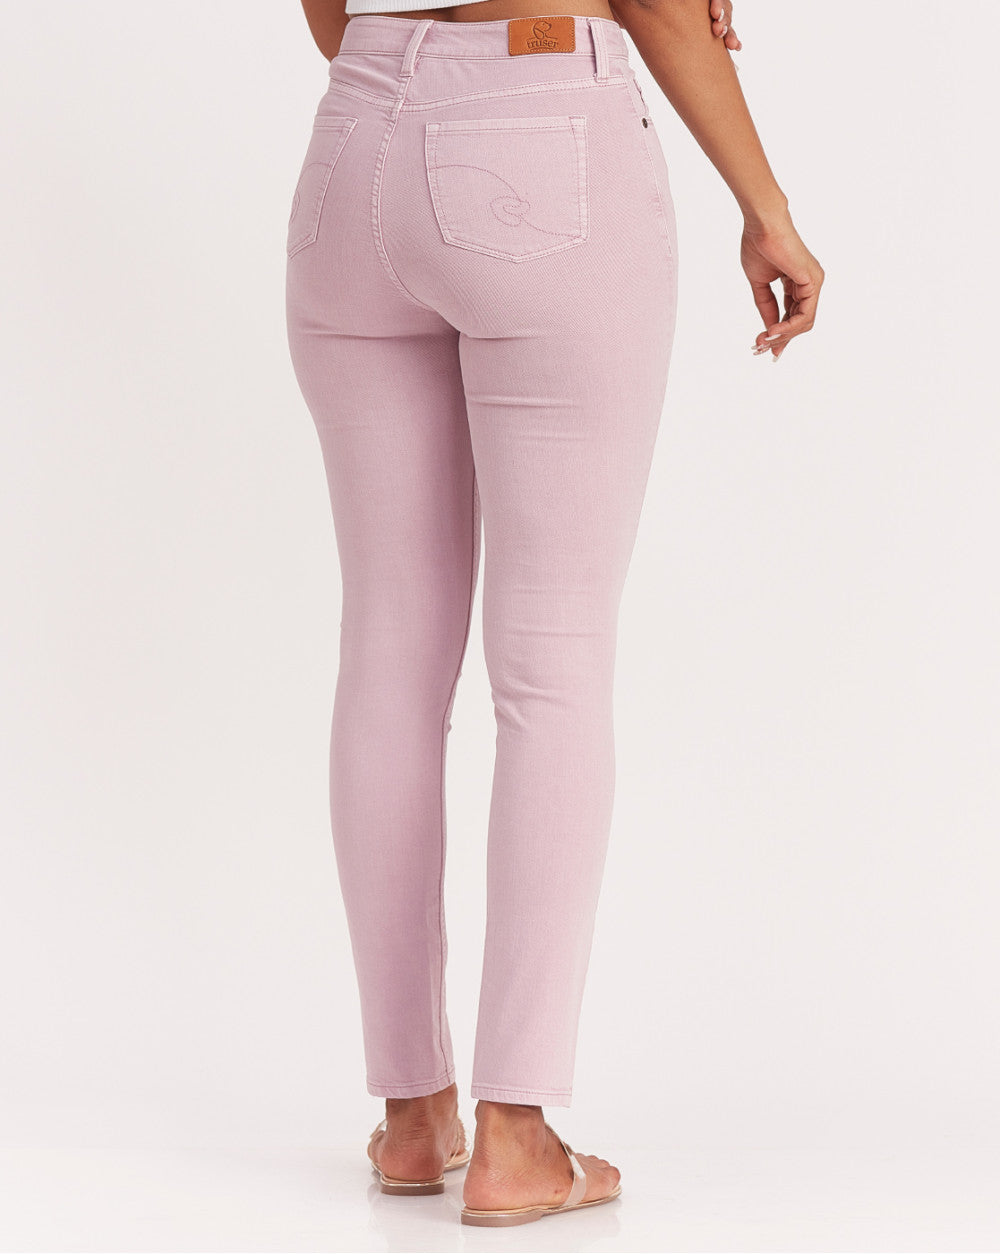 Skinny Fit High Waist Colored Jeans - Lush Lilac